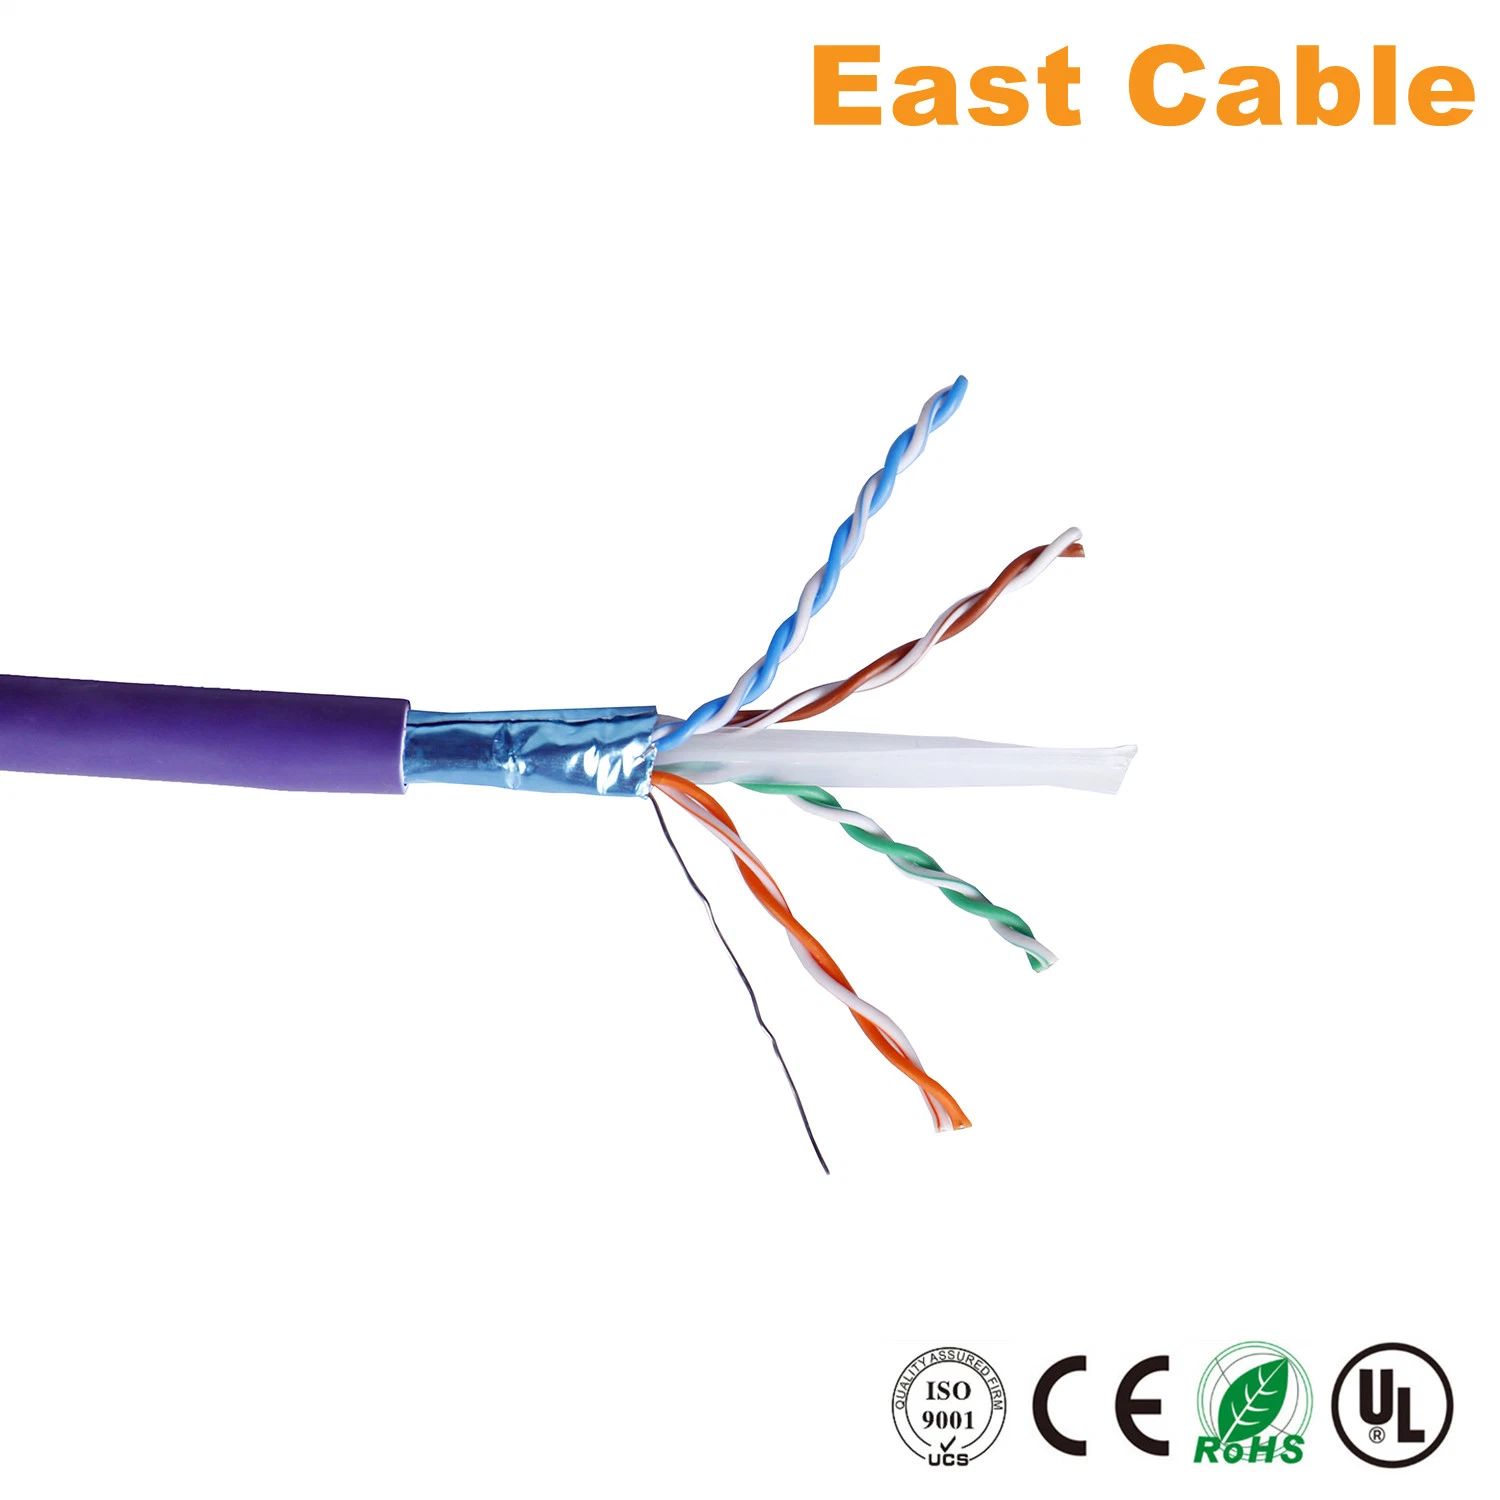 Manufacturer of UTP/FTP/SFTP Cat5e Cable/CAT6 Cable/Network Cable/LAN Cable/Communication Cable